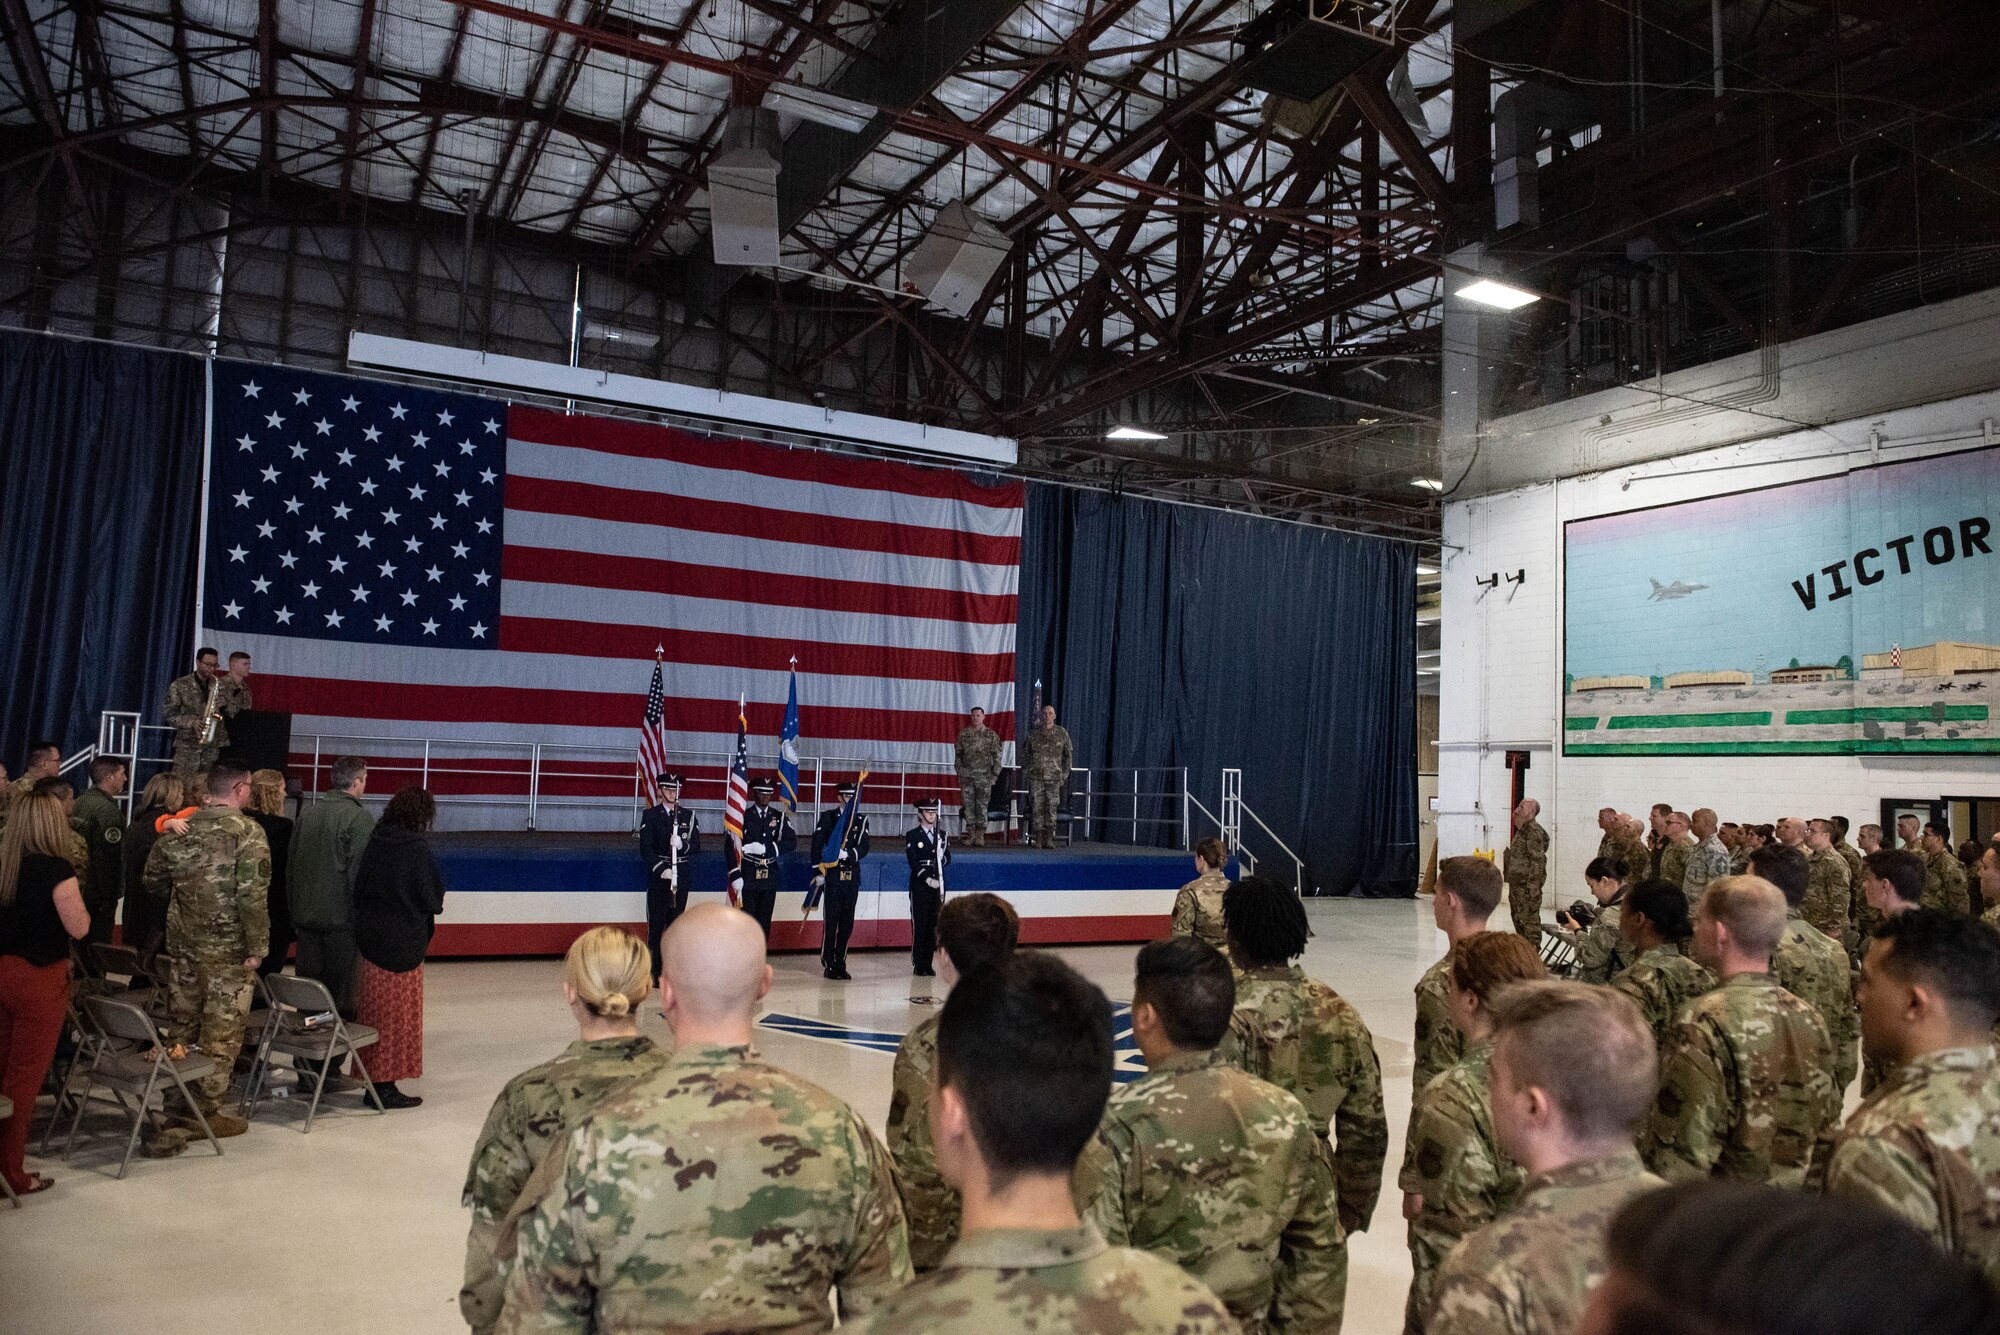 The 20th Force Support Squadron honor guard hoists the colors while the national anthem plays during a squadron stand-up ceremony at Shaw Air Force Base, South Carolina, Feb. 24, 2020.